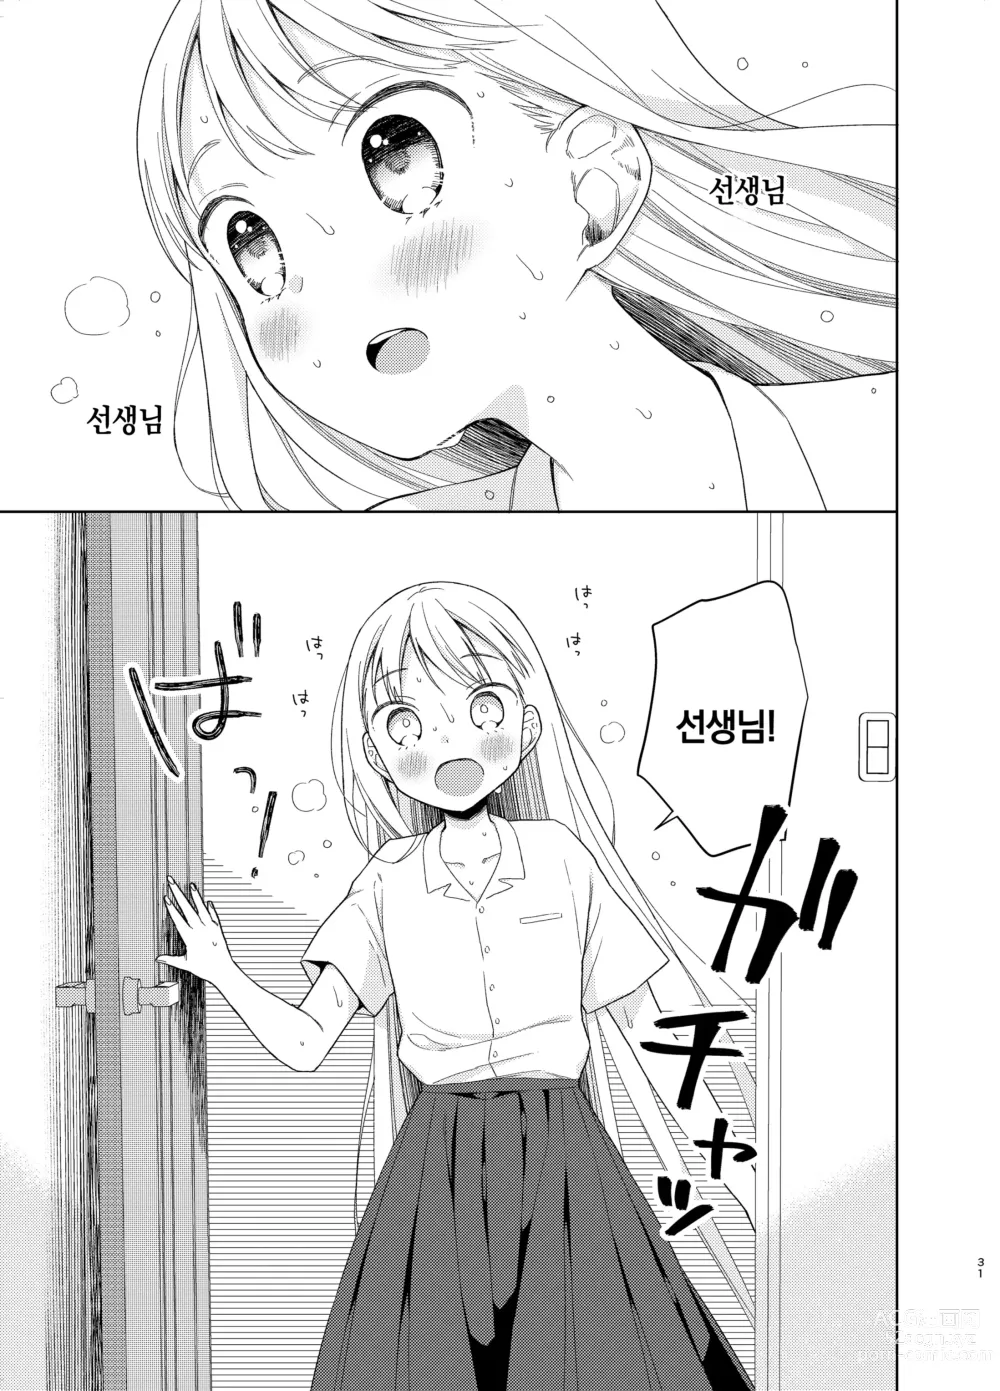 Page 30 of doujinshi TS소녀 하루키 군 5